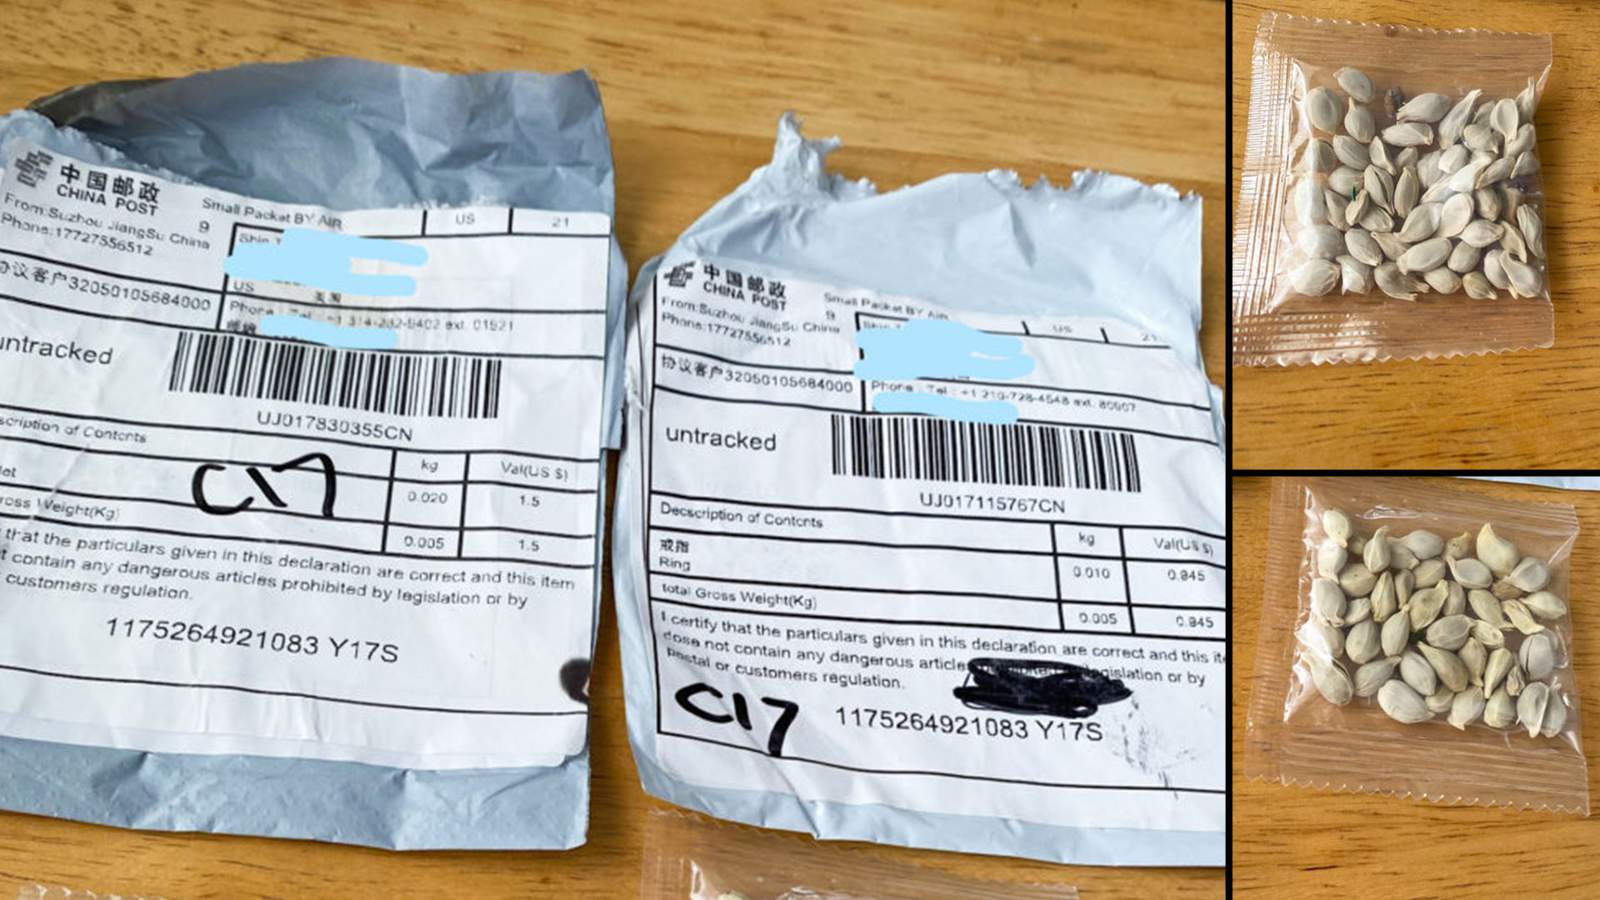 Mystery seeds from China showing up in Texas mailboxes